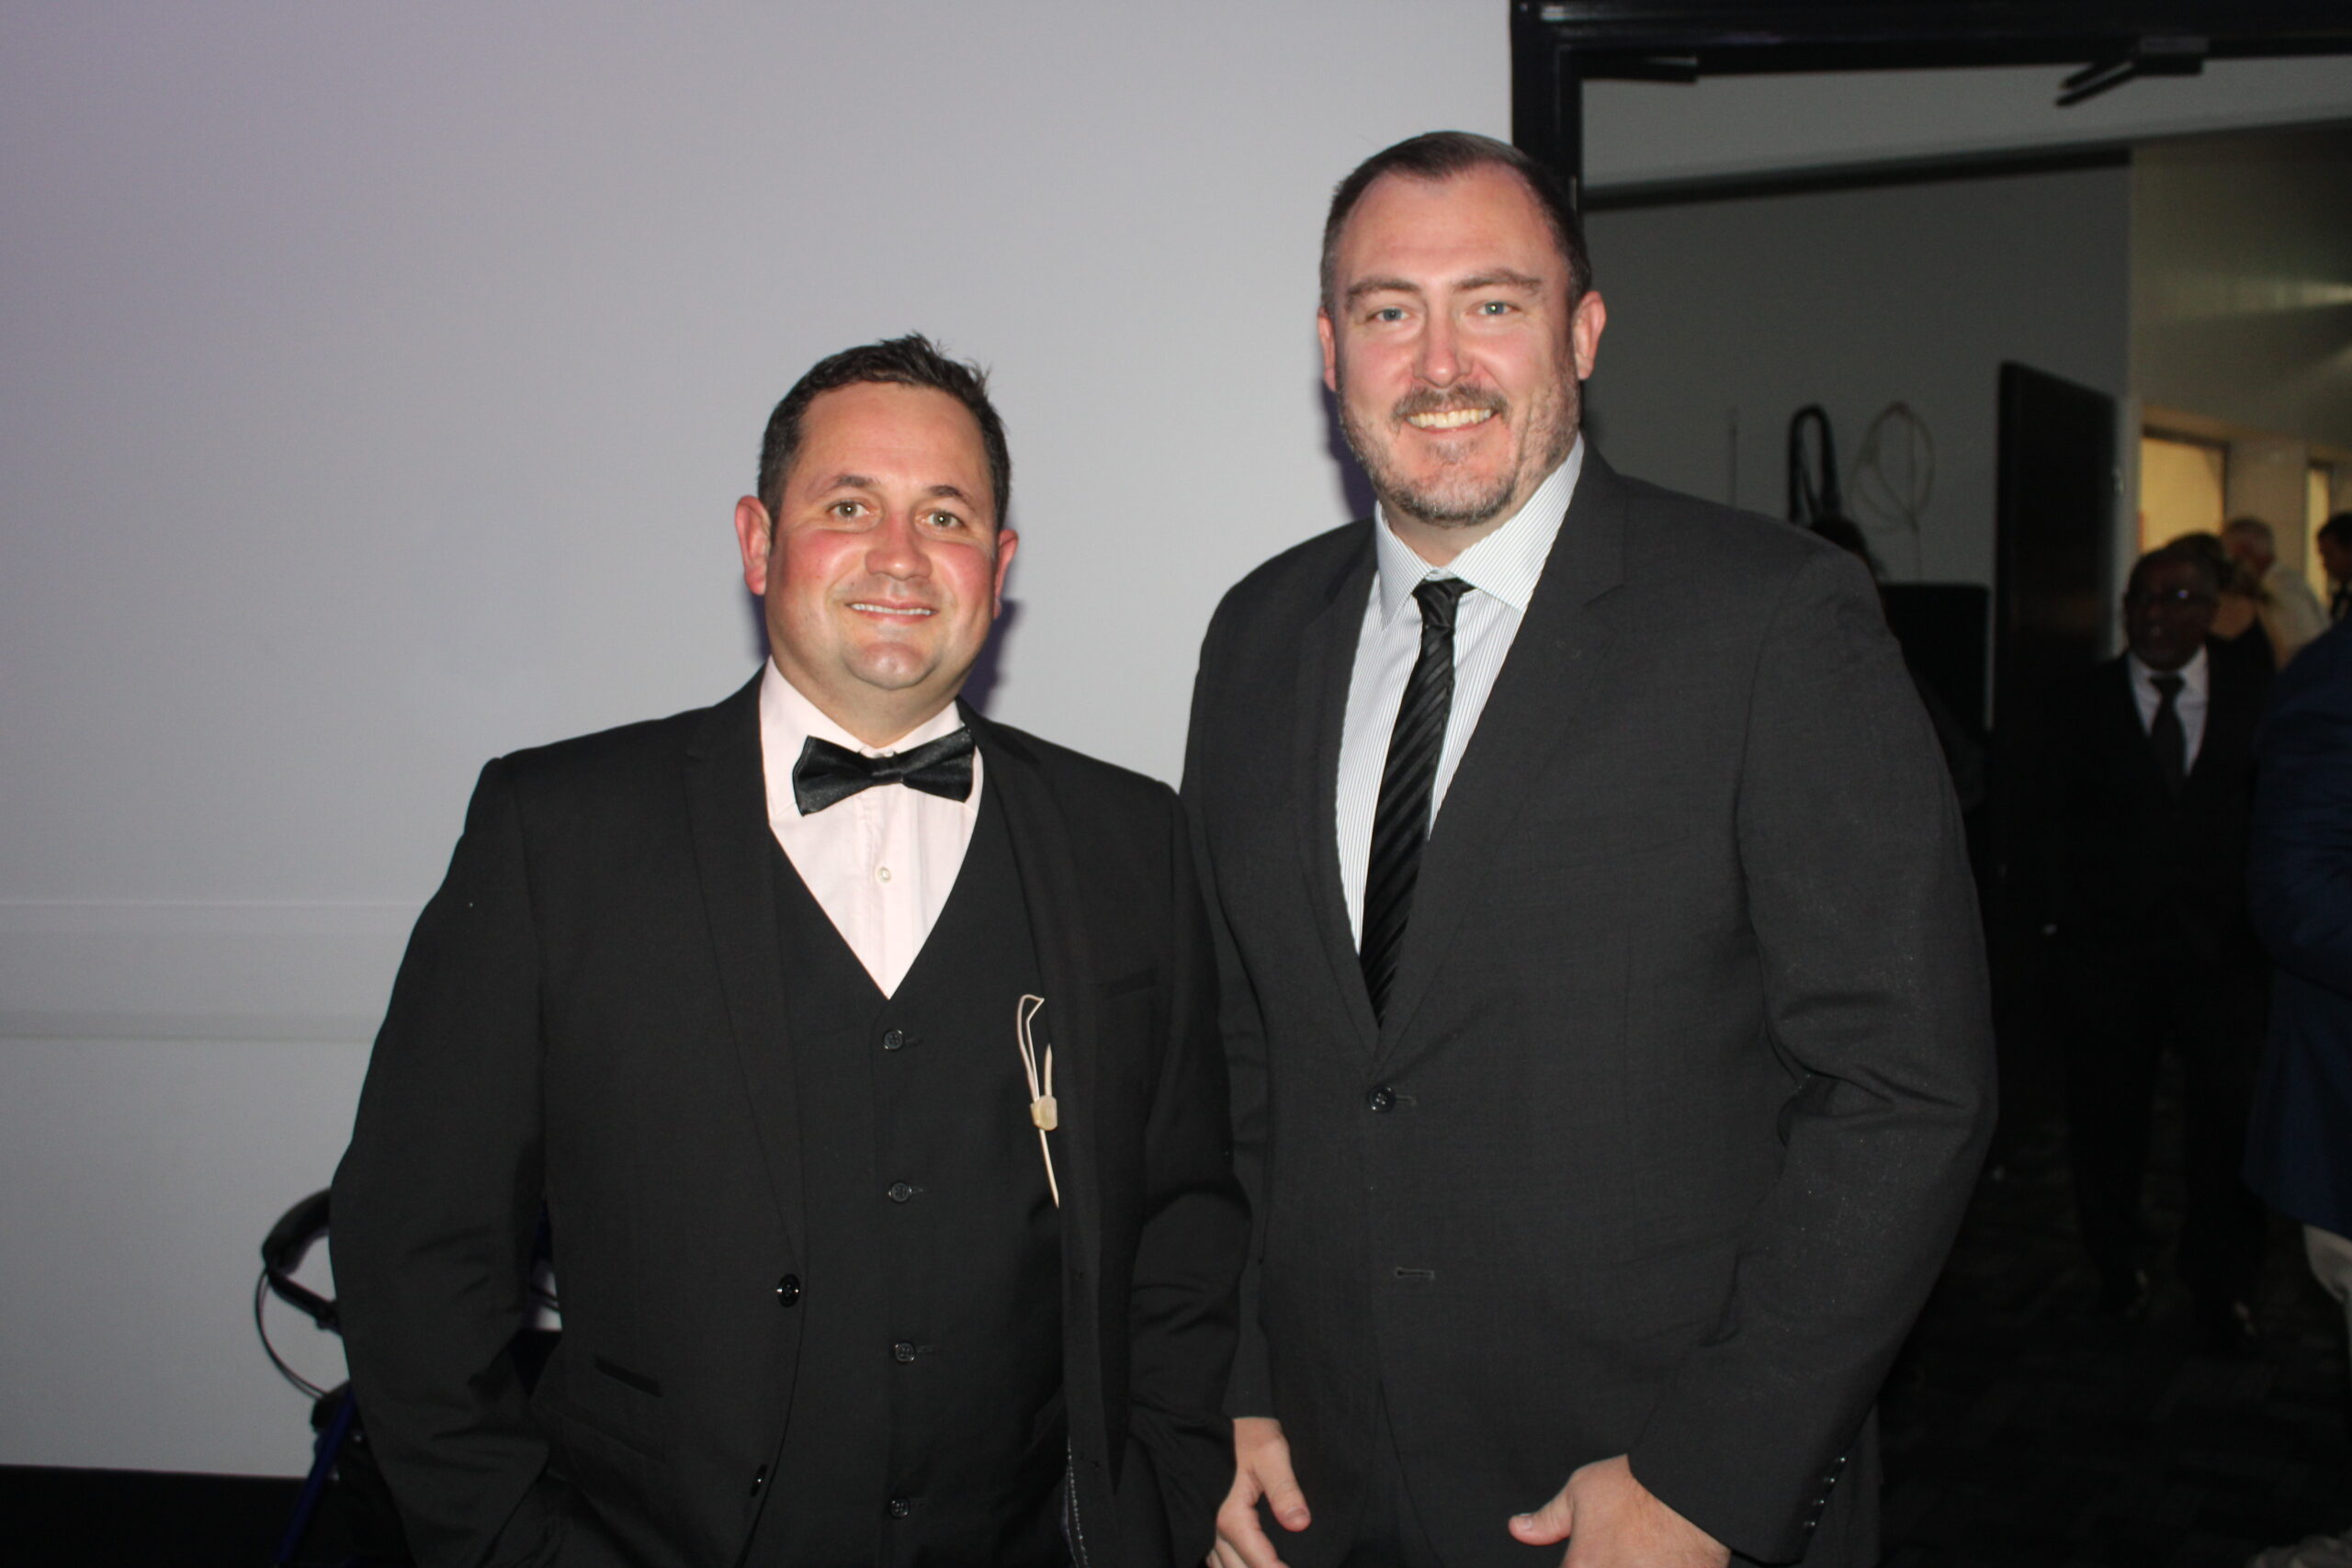 Justin Smith officiated as master-of-ceremonies at Saturday night’s Narrabri Stars Dance for Cancer. He is pictured with Narrabri Shire Council general manager Stewart Todd.